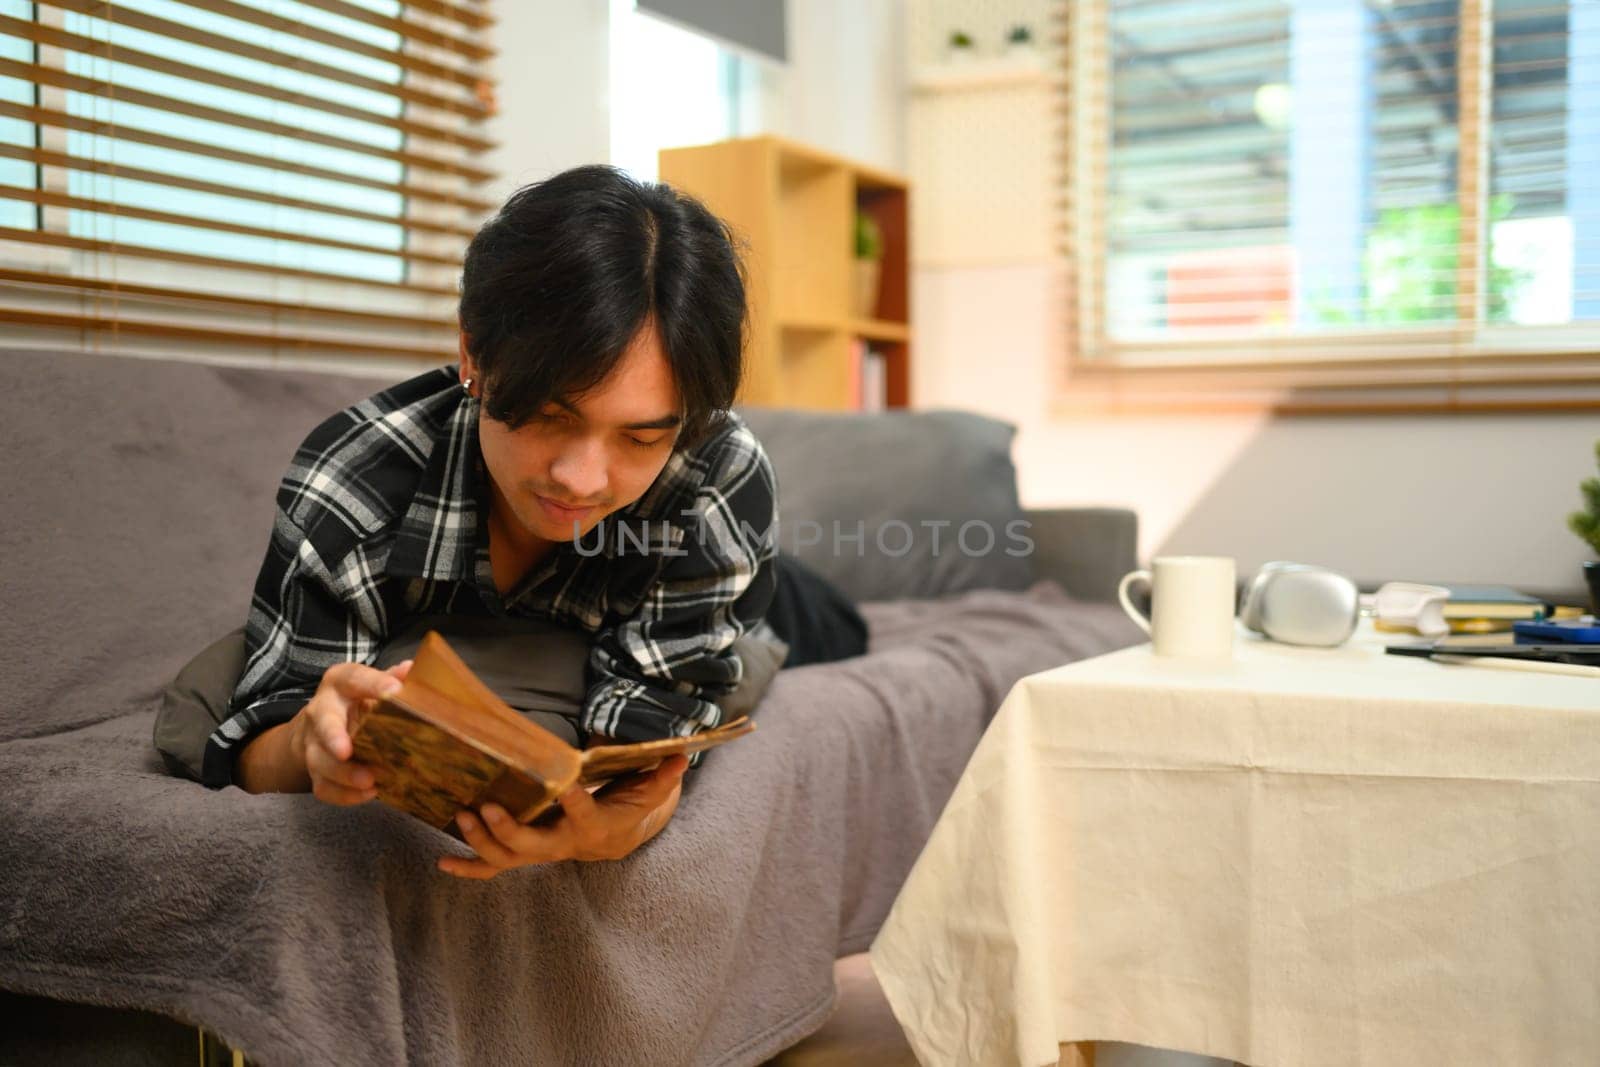 Happy young man lying on couch and reading book. Recreation and leisure activity concepts.